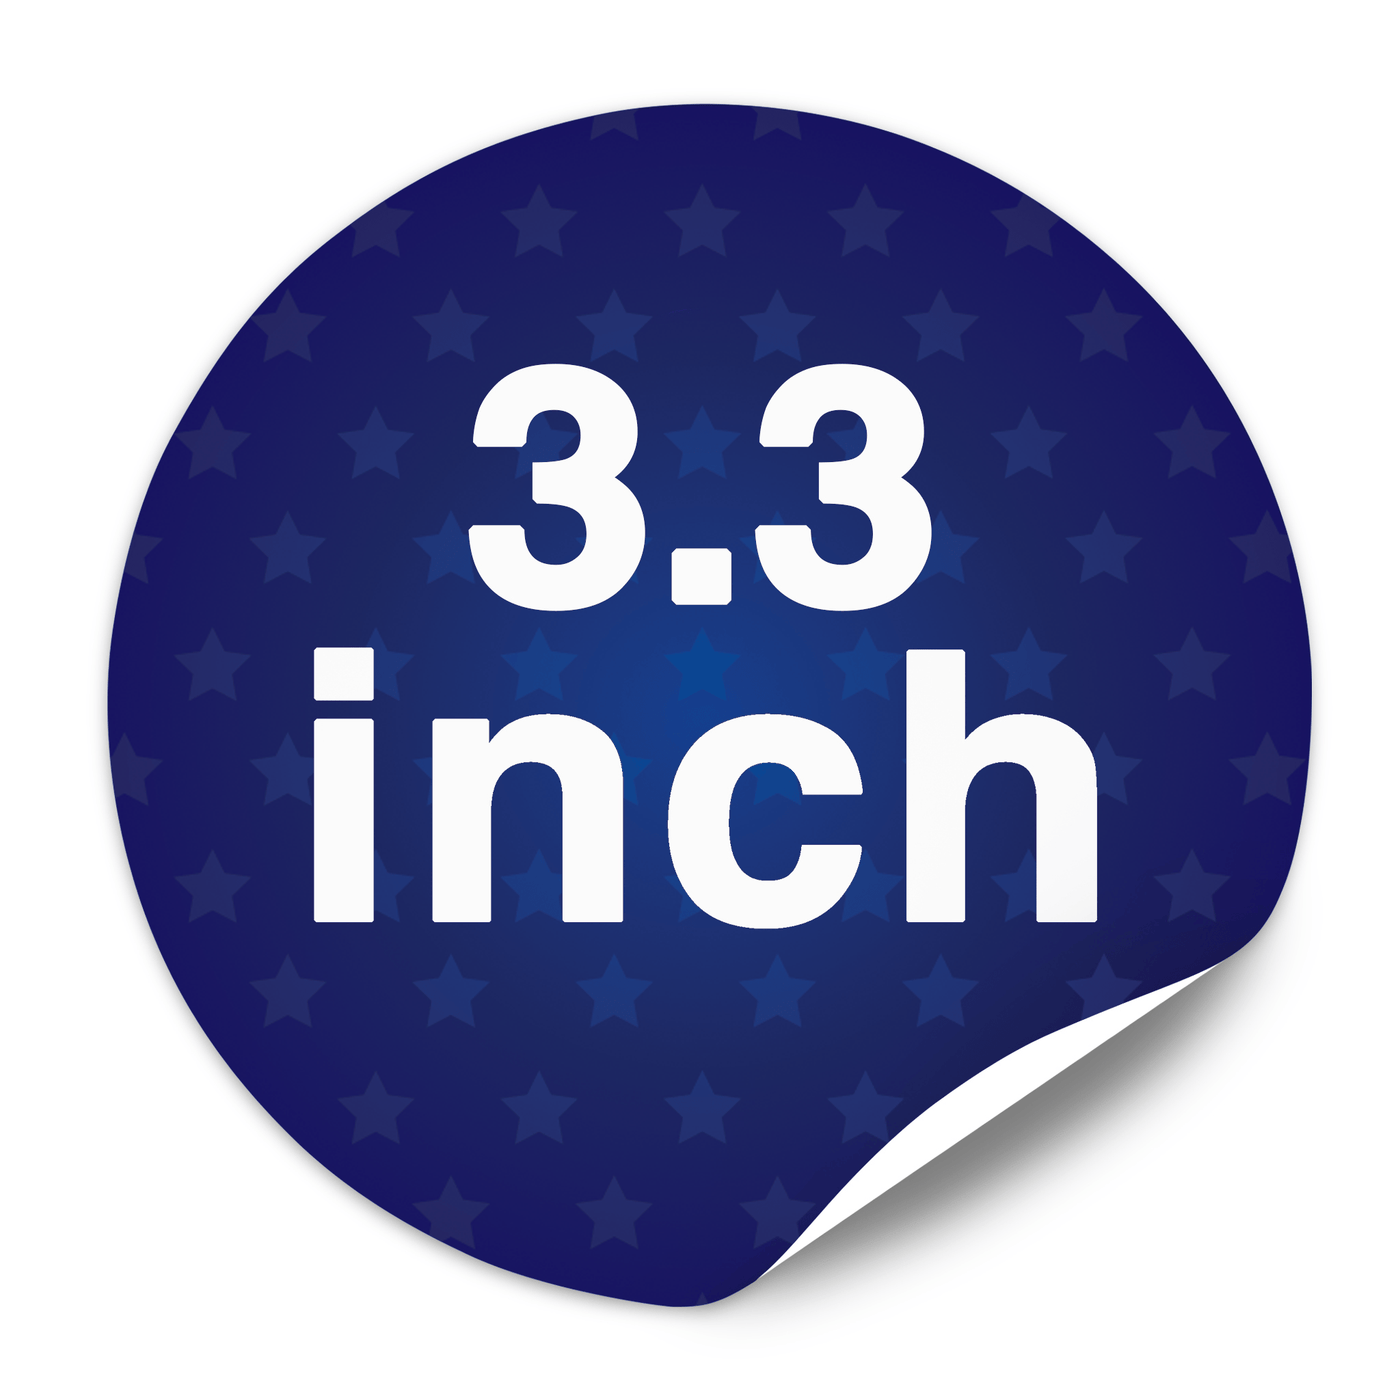 3.33" Round Custom Lapel Stickers, paper with adhesive back